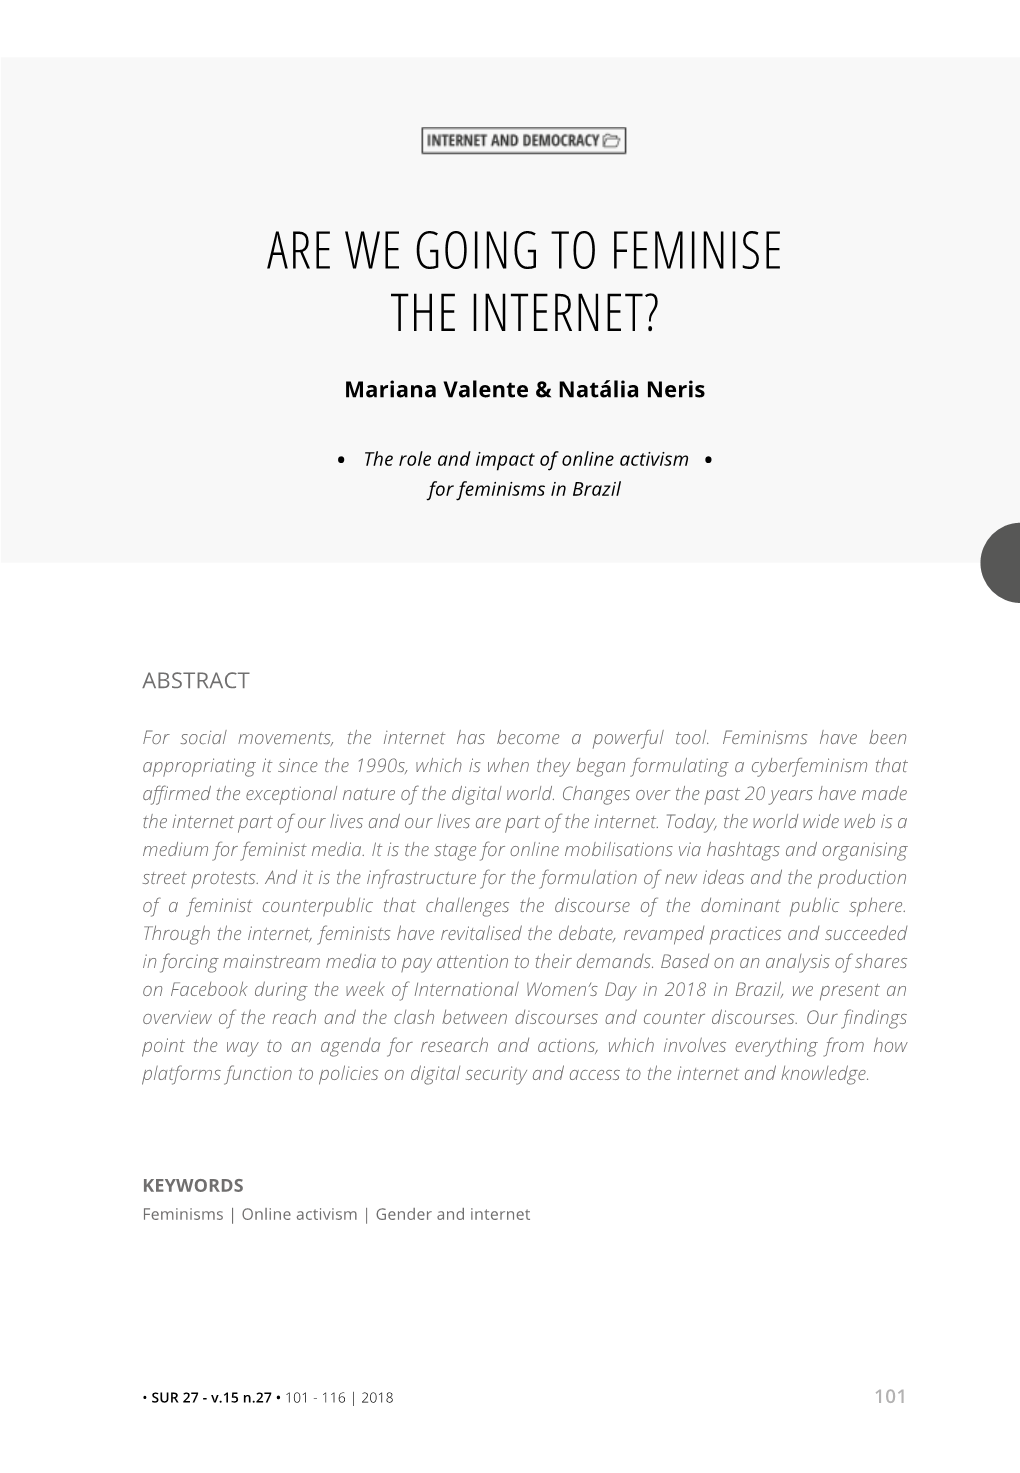 Are We Going to Feminise the Internet?